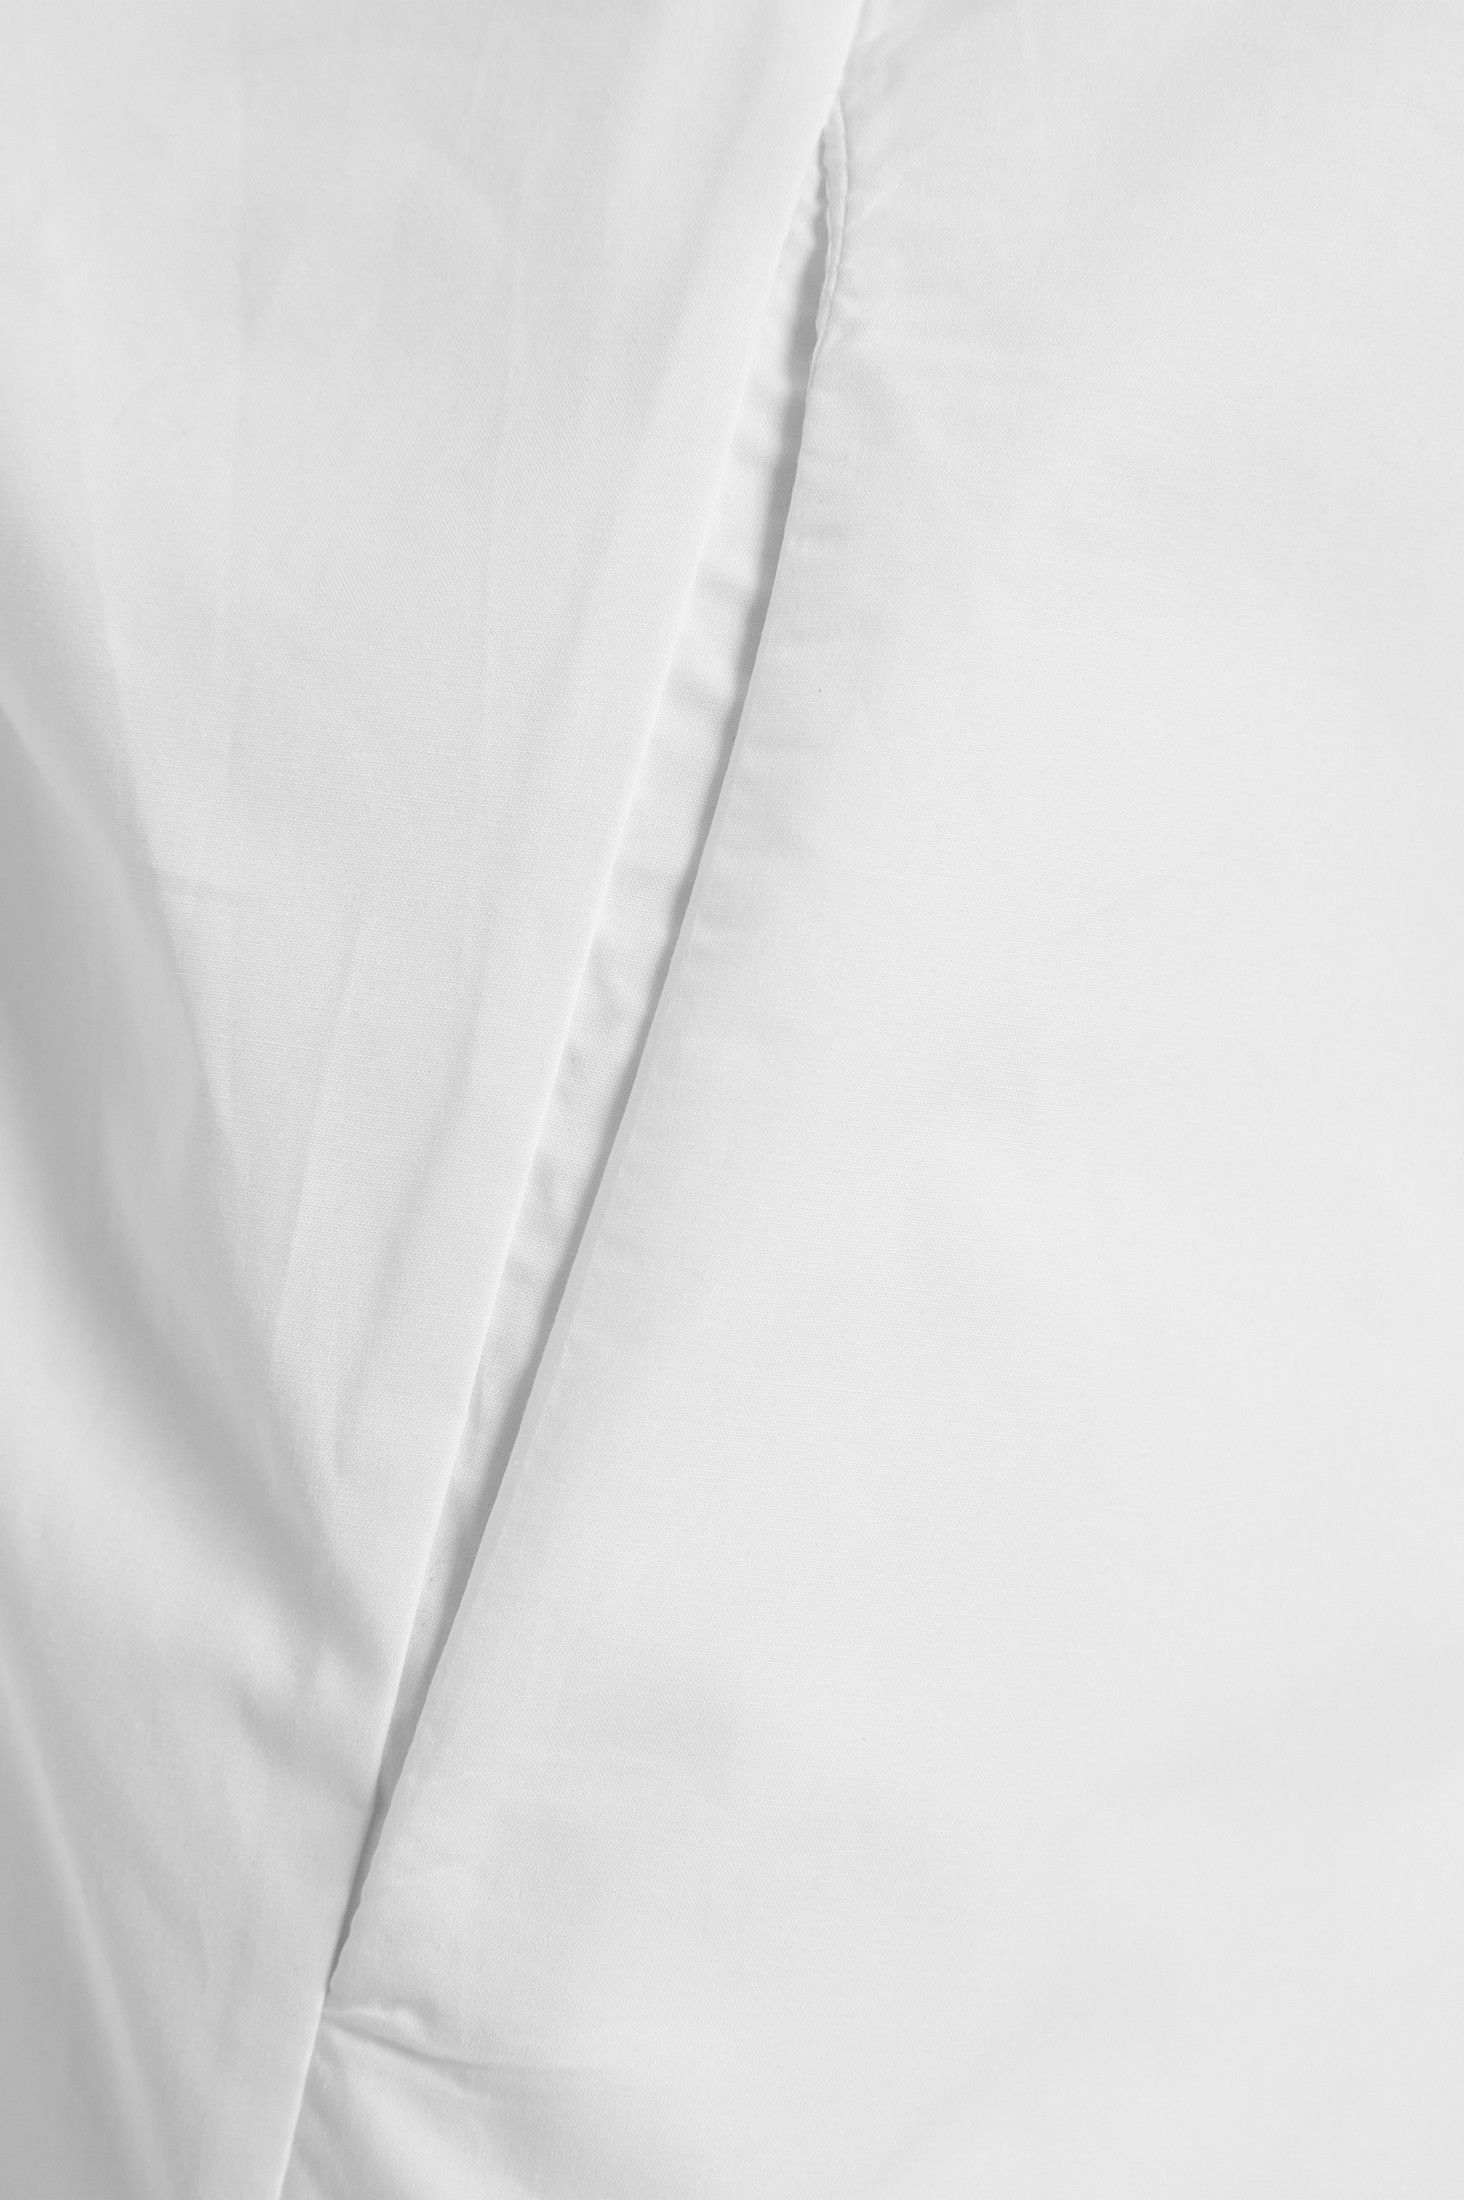 Darted waist shirt with pockets white ' - ' ΤΟΠ